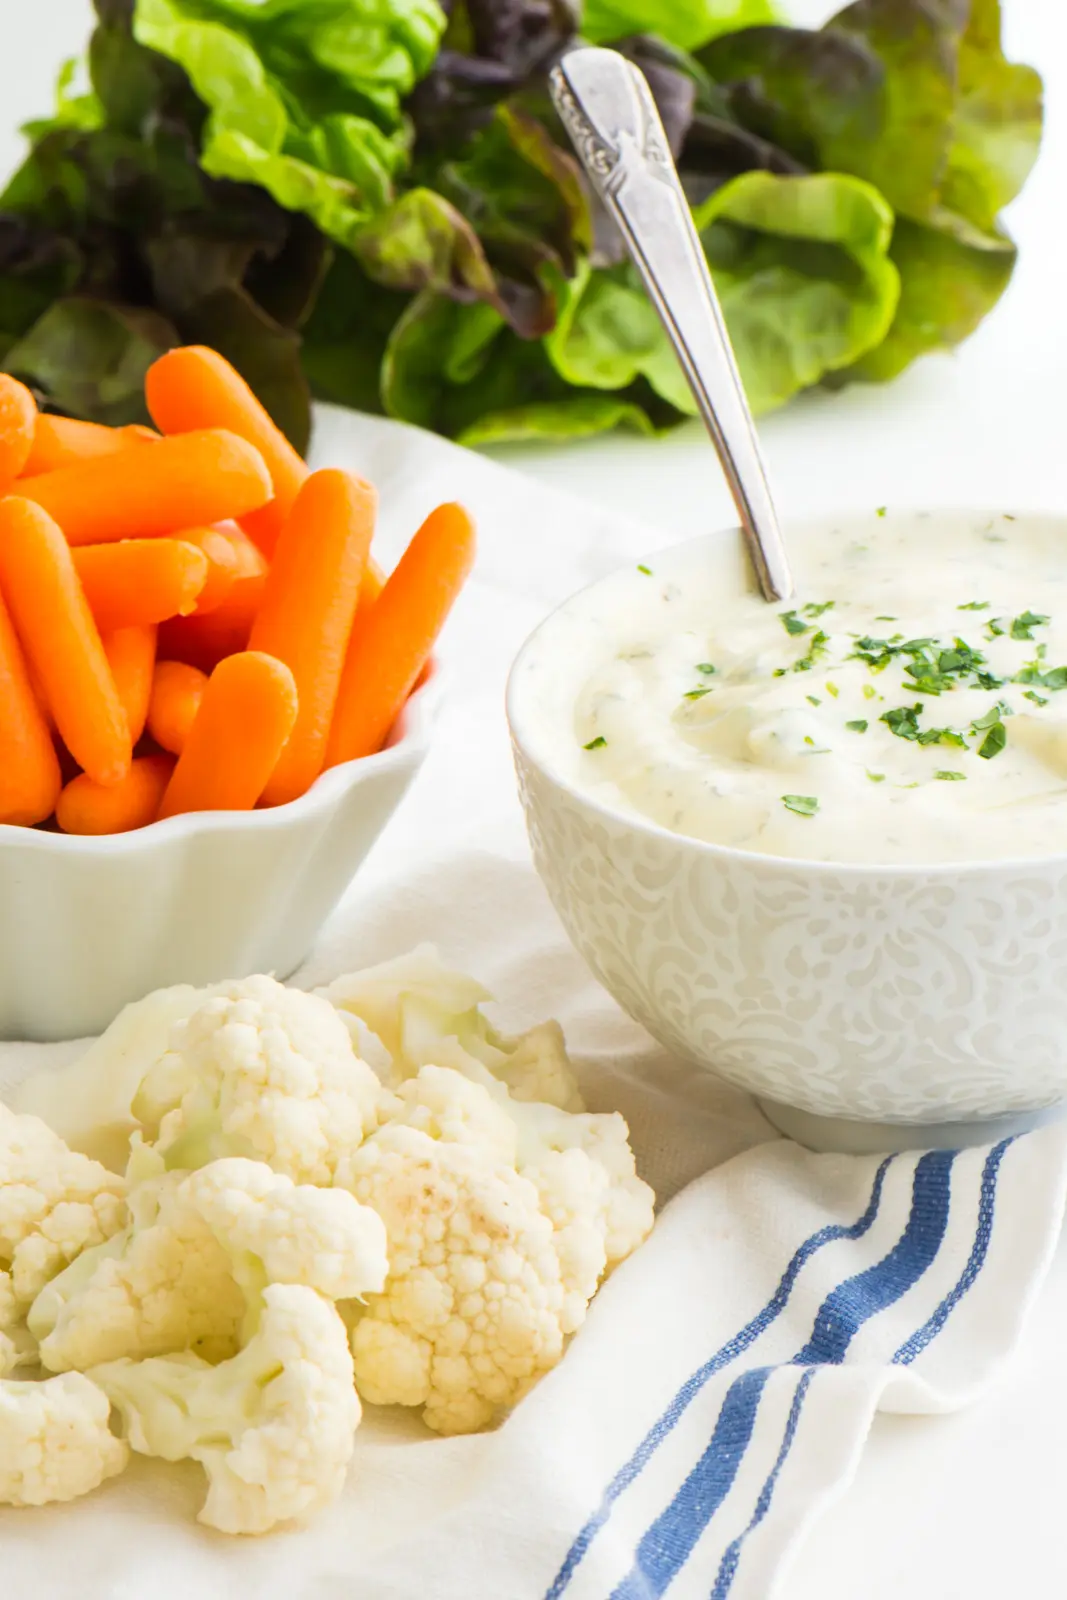 A bowl of dip sits next to baby carrots and cauliflower florets.